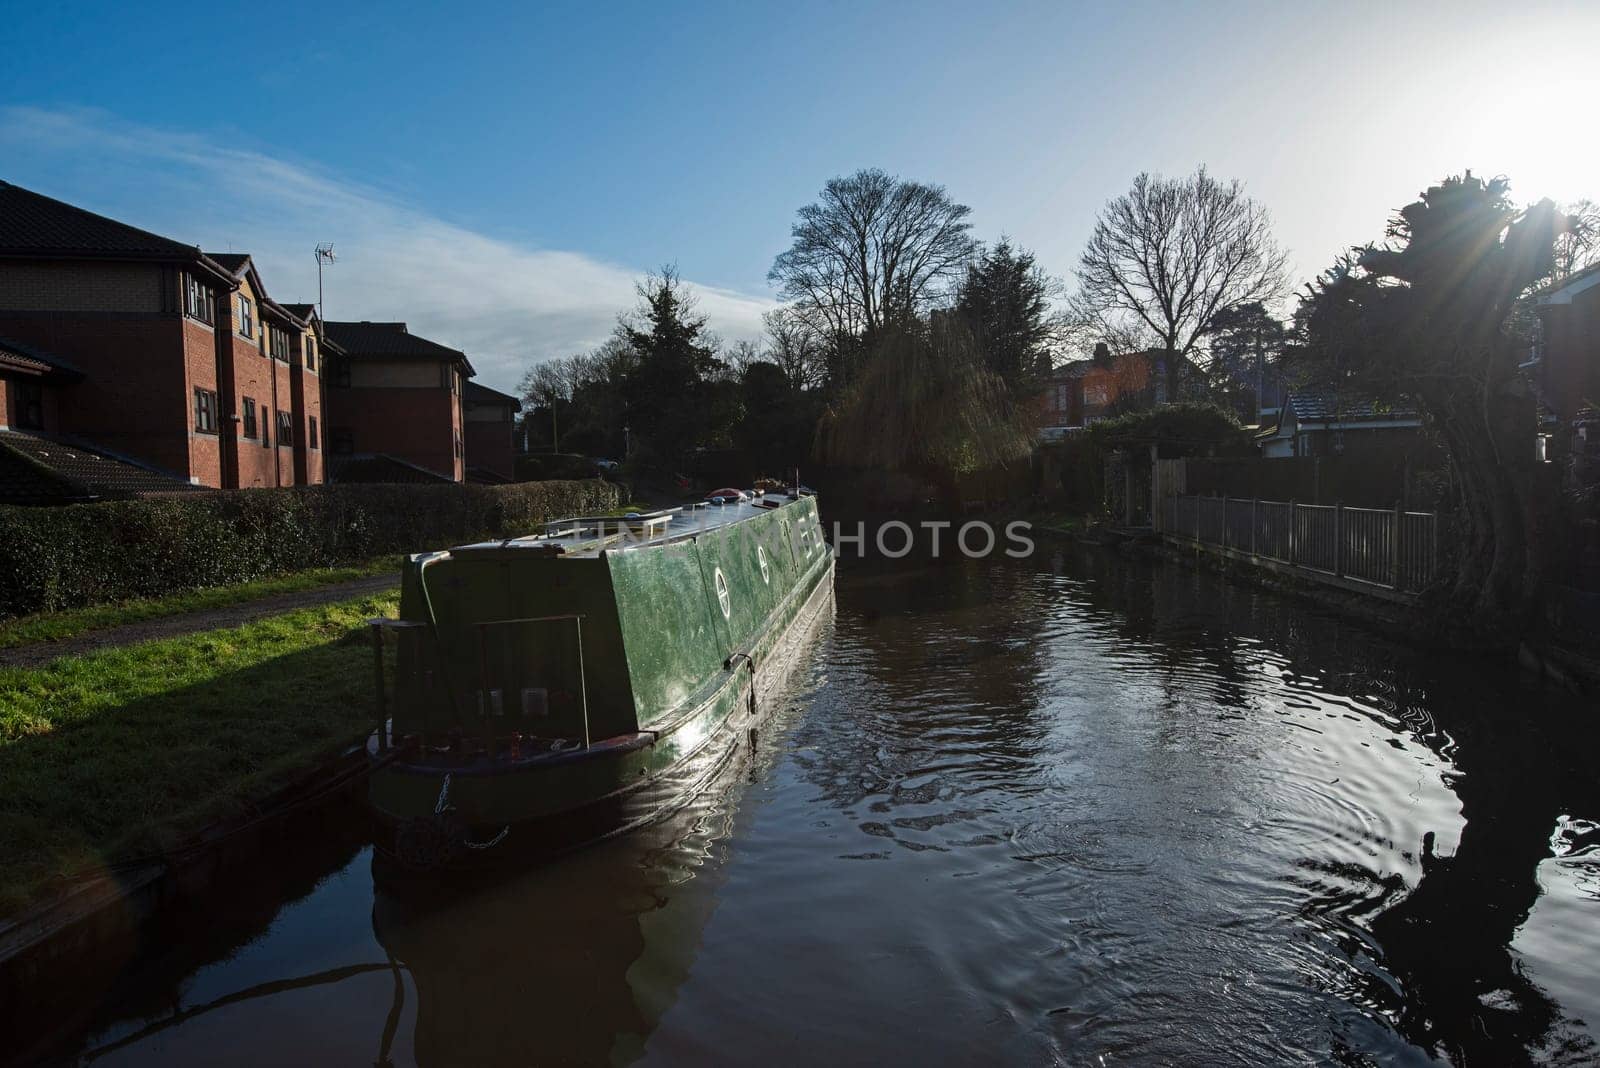 Narrowboat on a British canal in urban setting by paulvinten